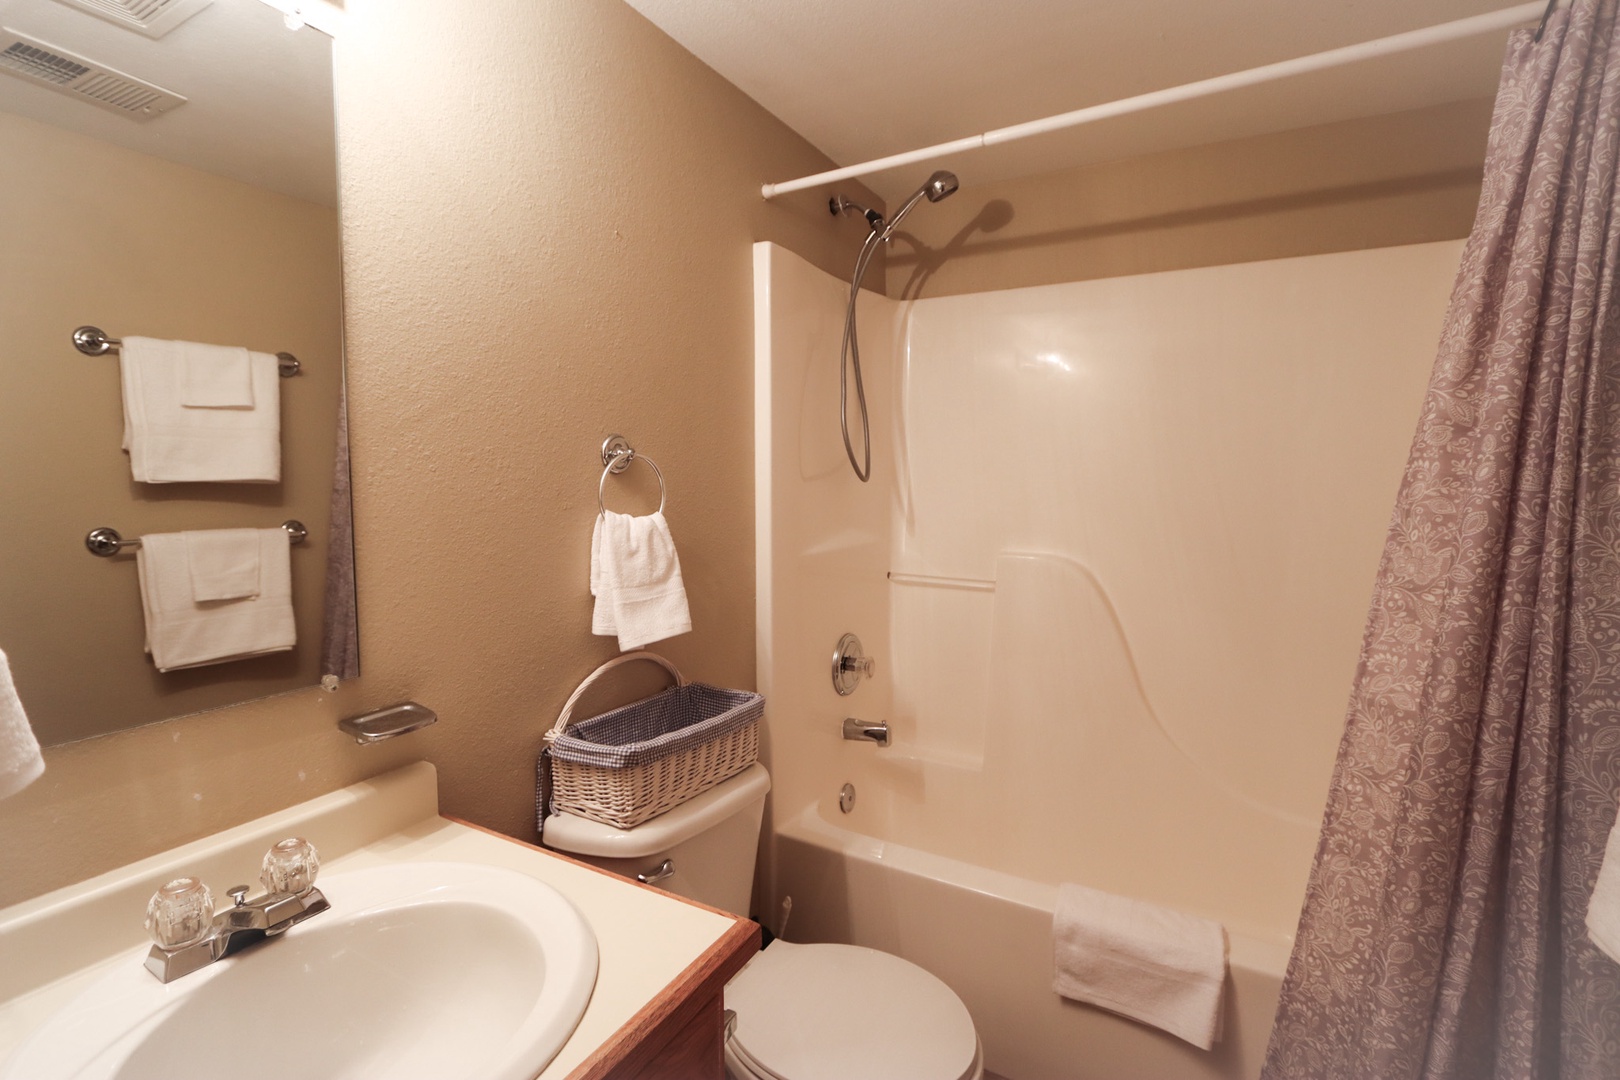 The shared full bathroom offers a single vanity & shower/tub combo